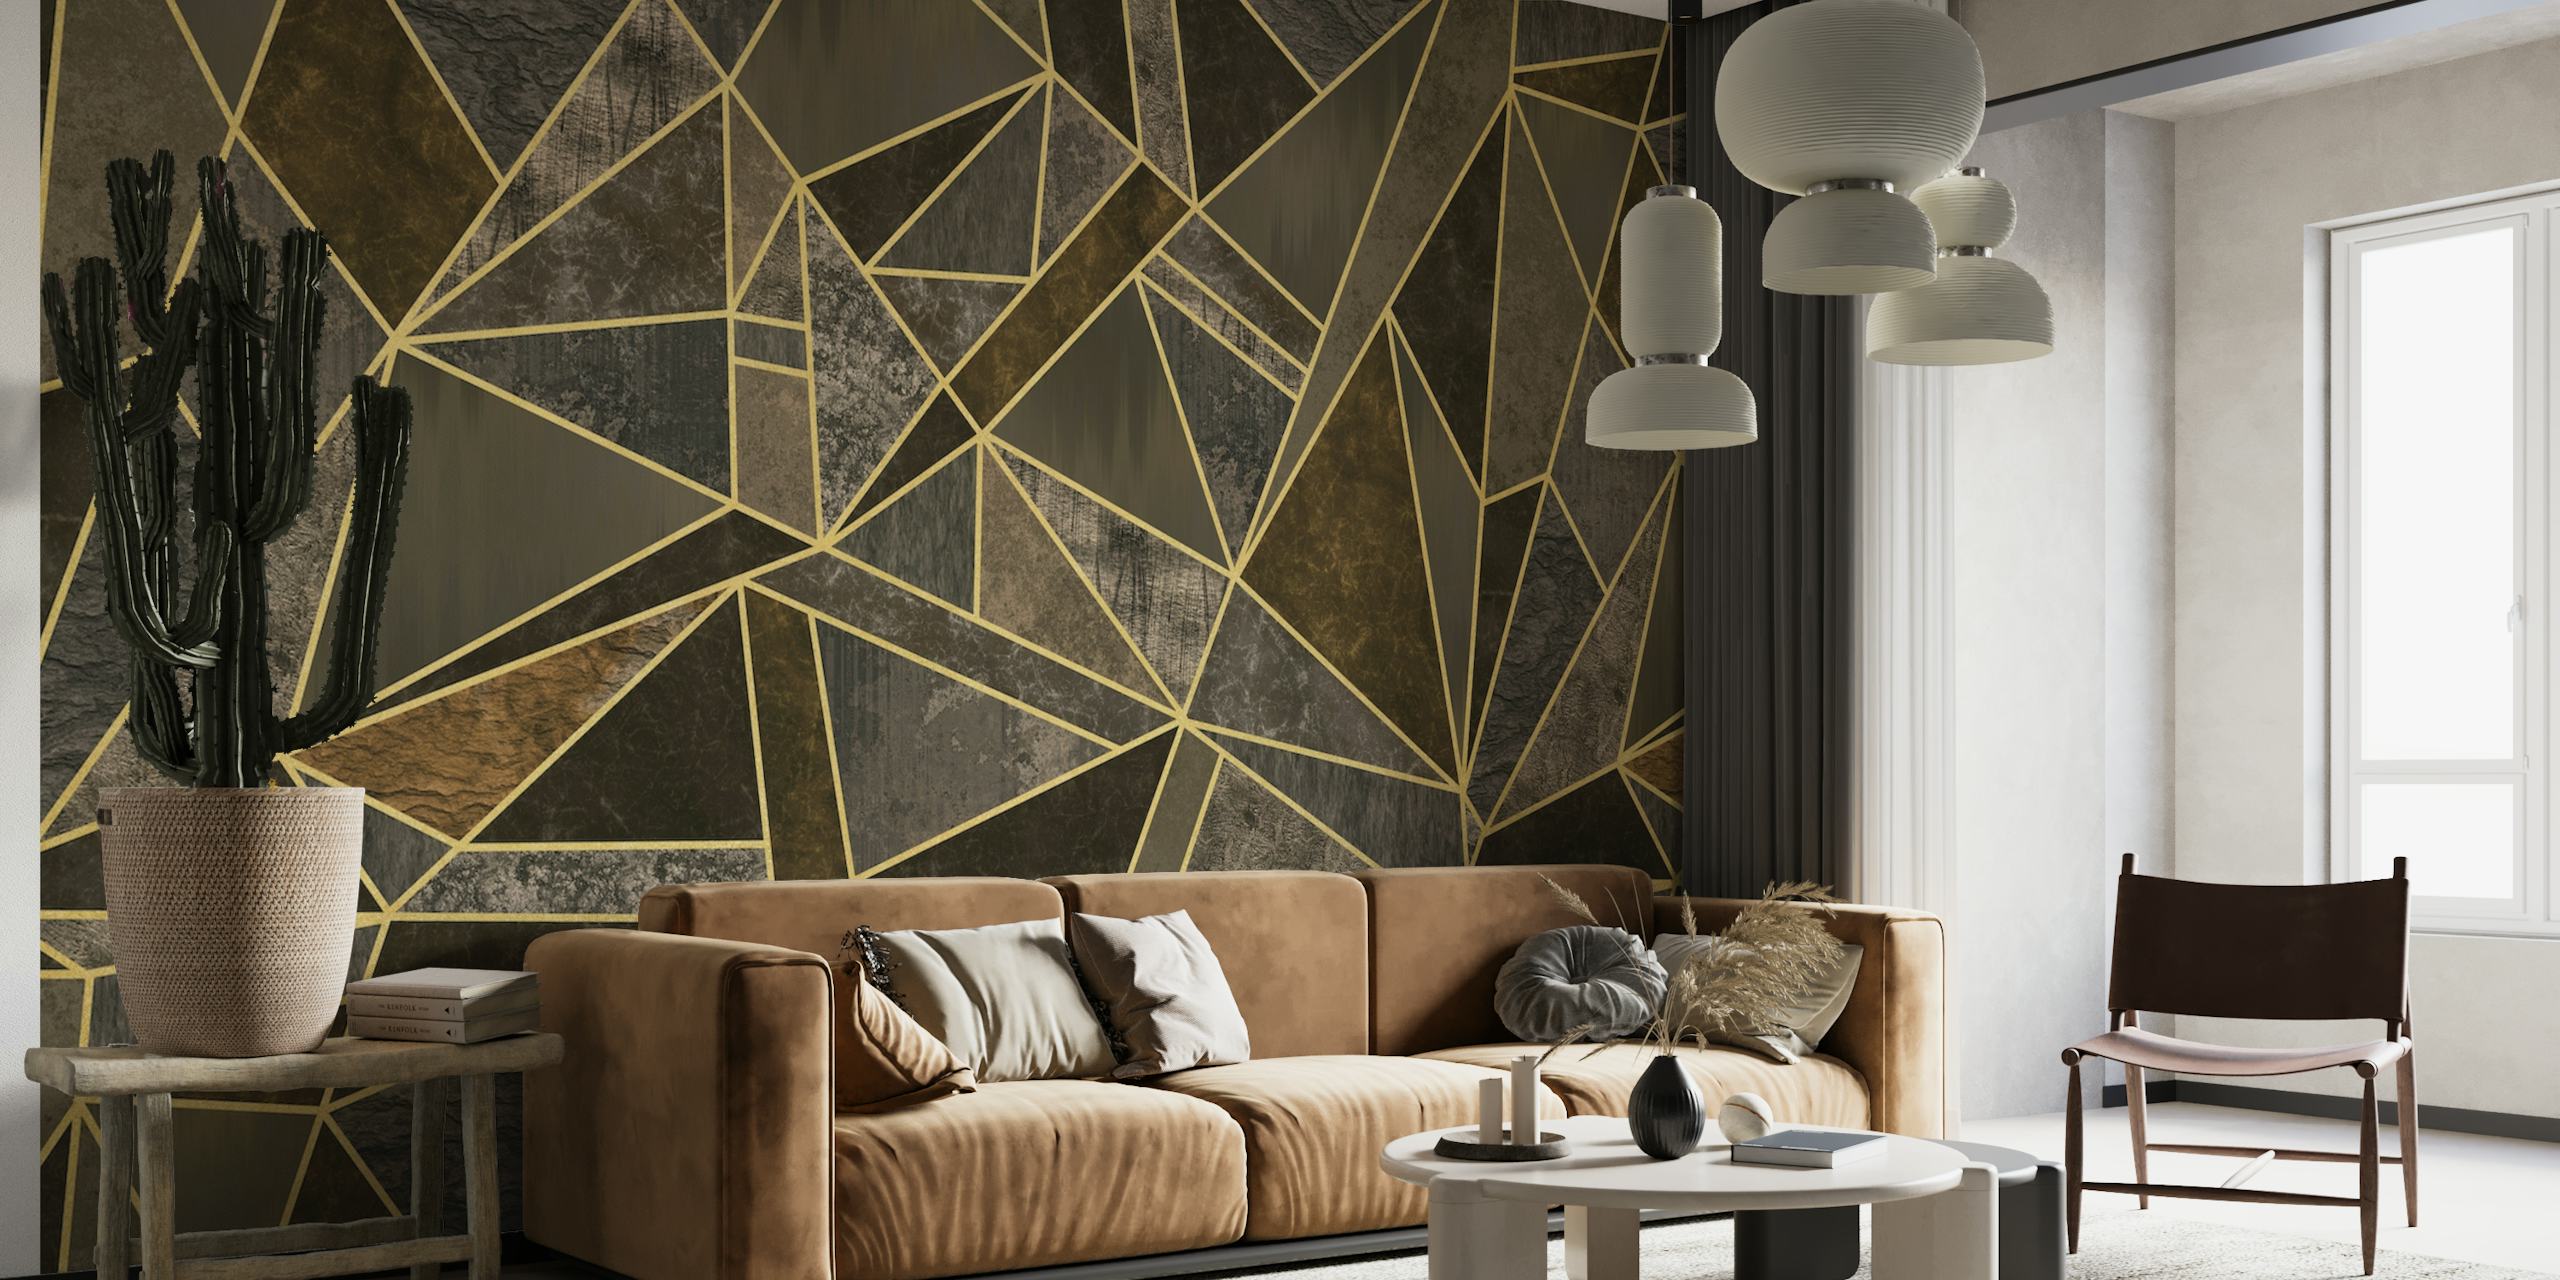 Luxurious geometric mosaic pattern wall mural in brown and gold